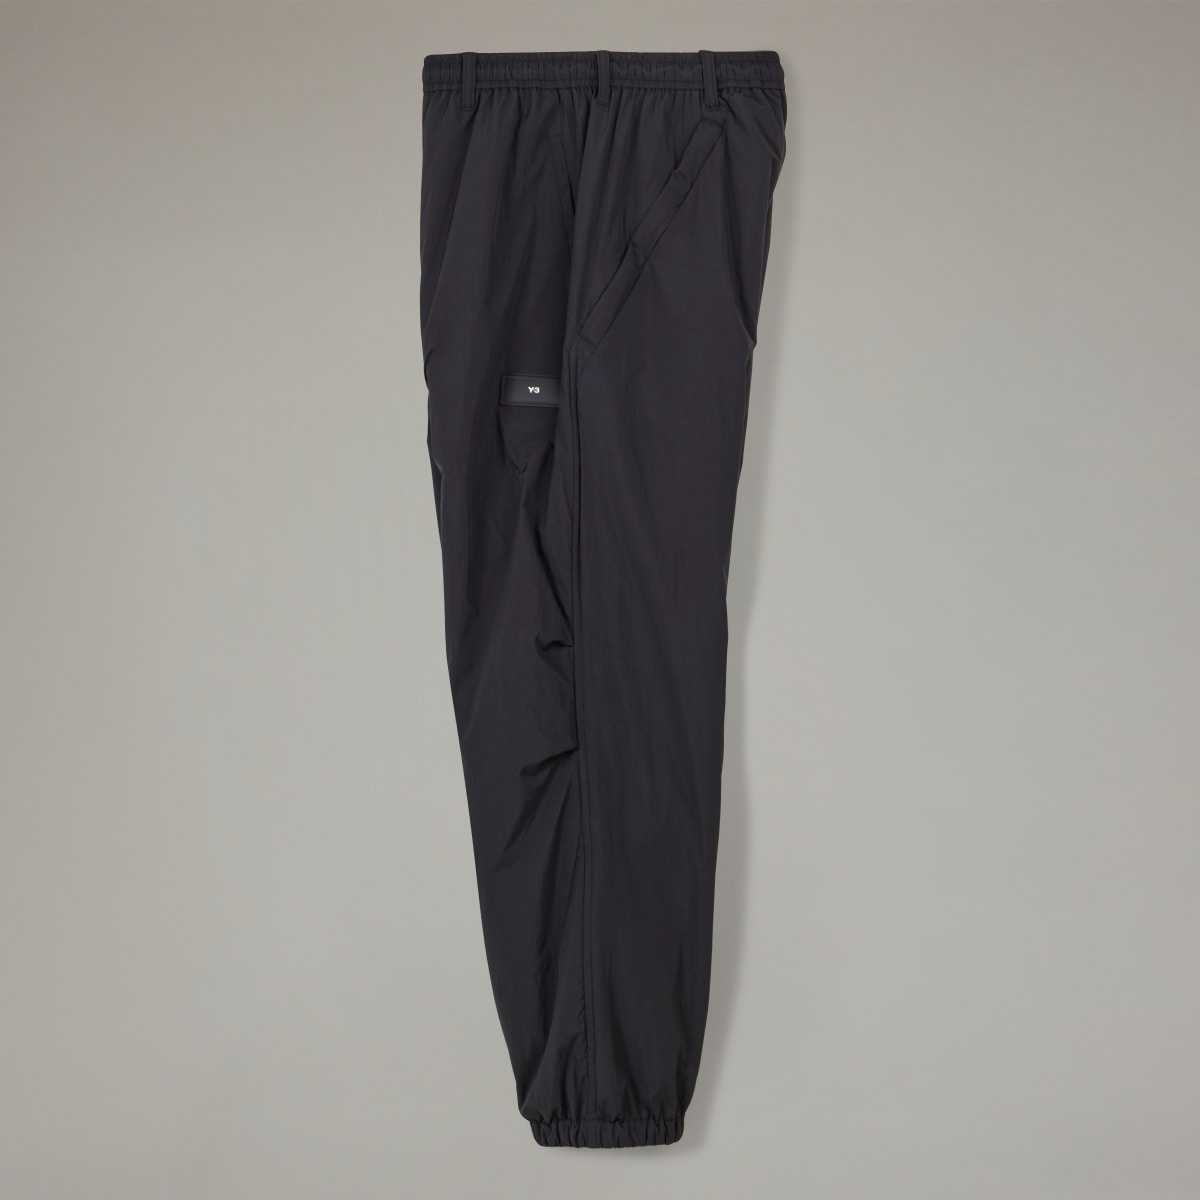 Adidas Y-3 Padded Tracksuit Bottoms. 5